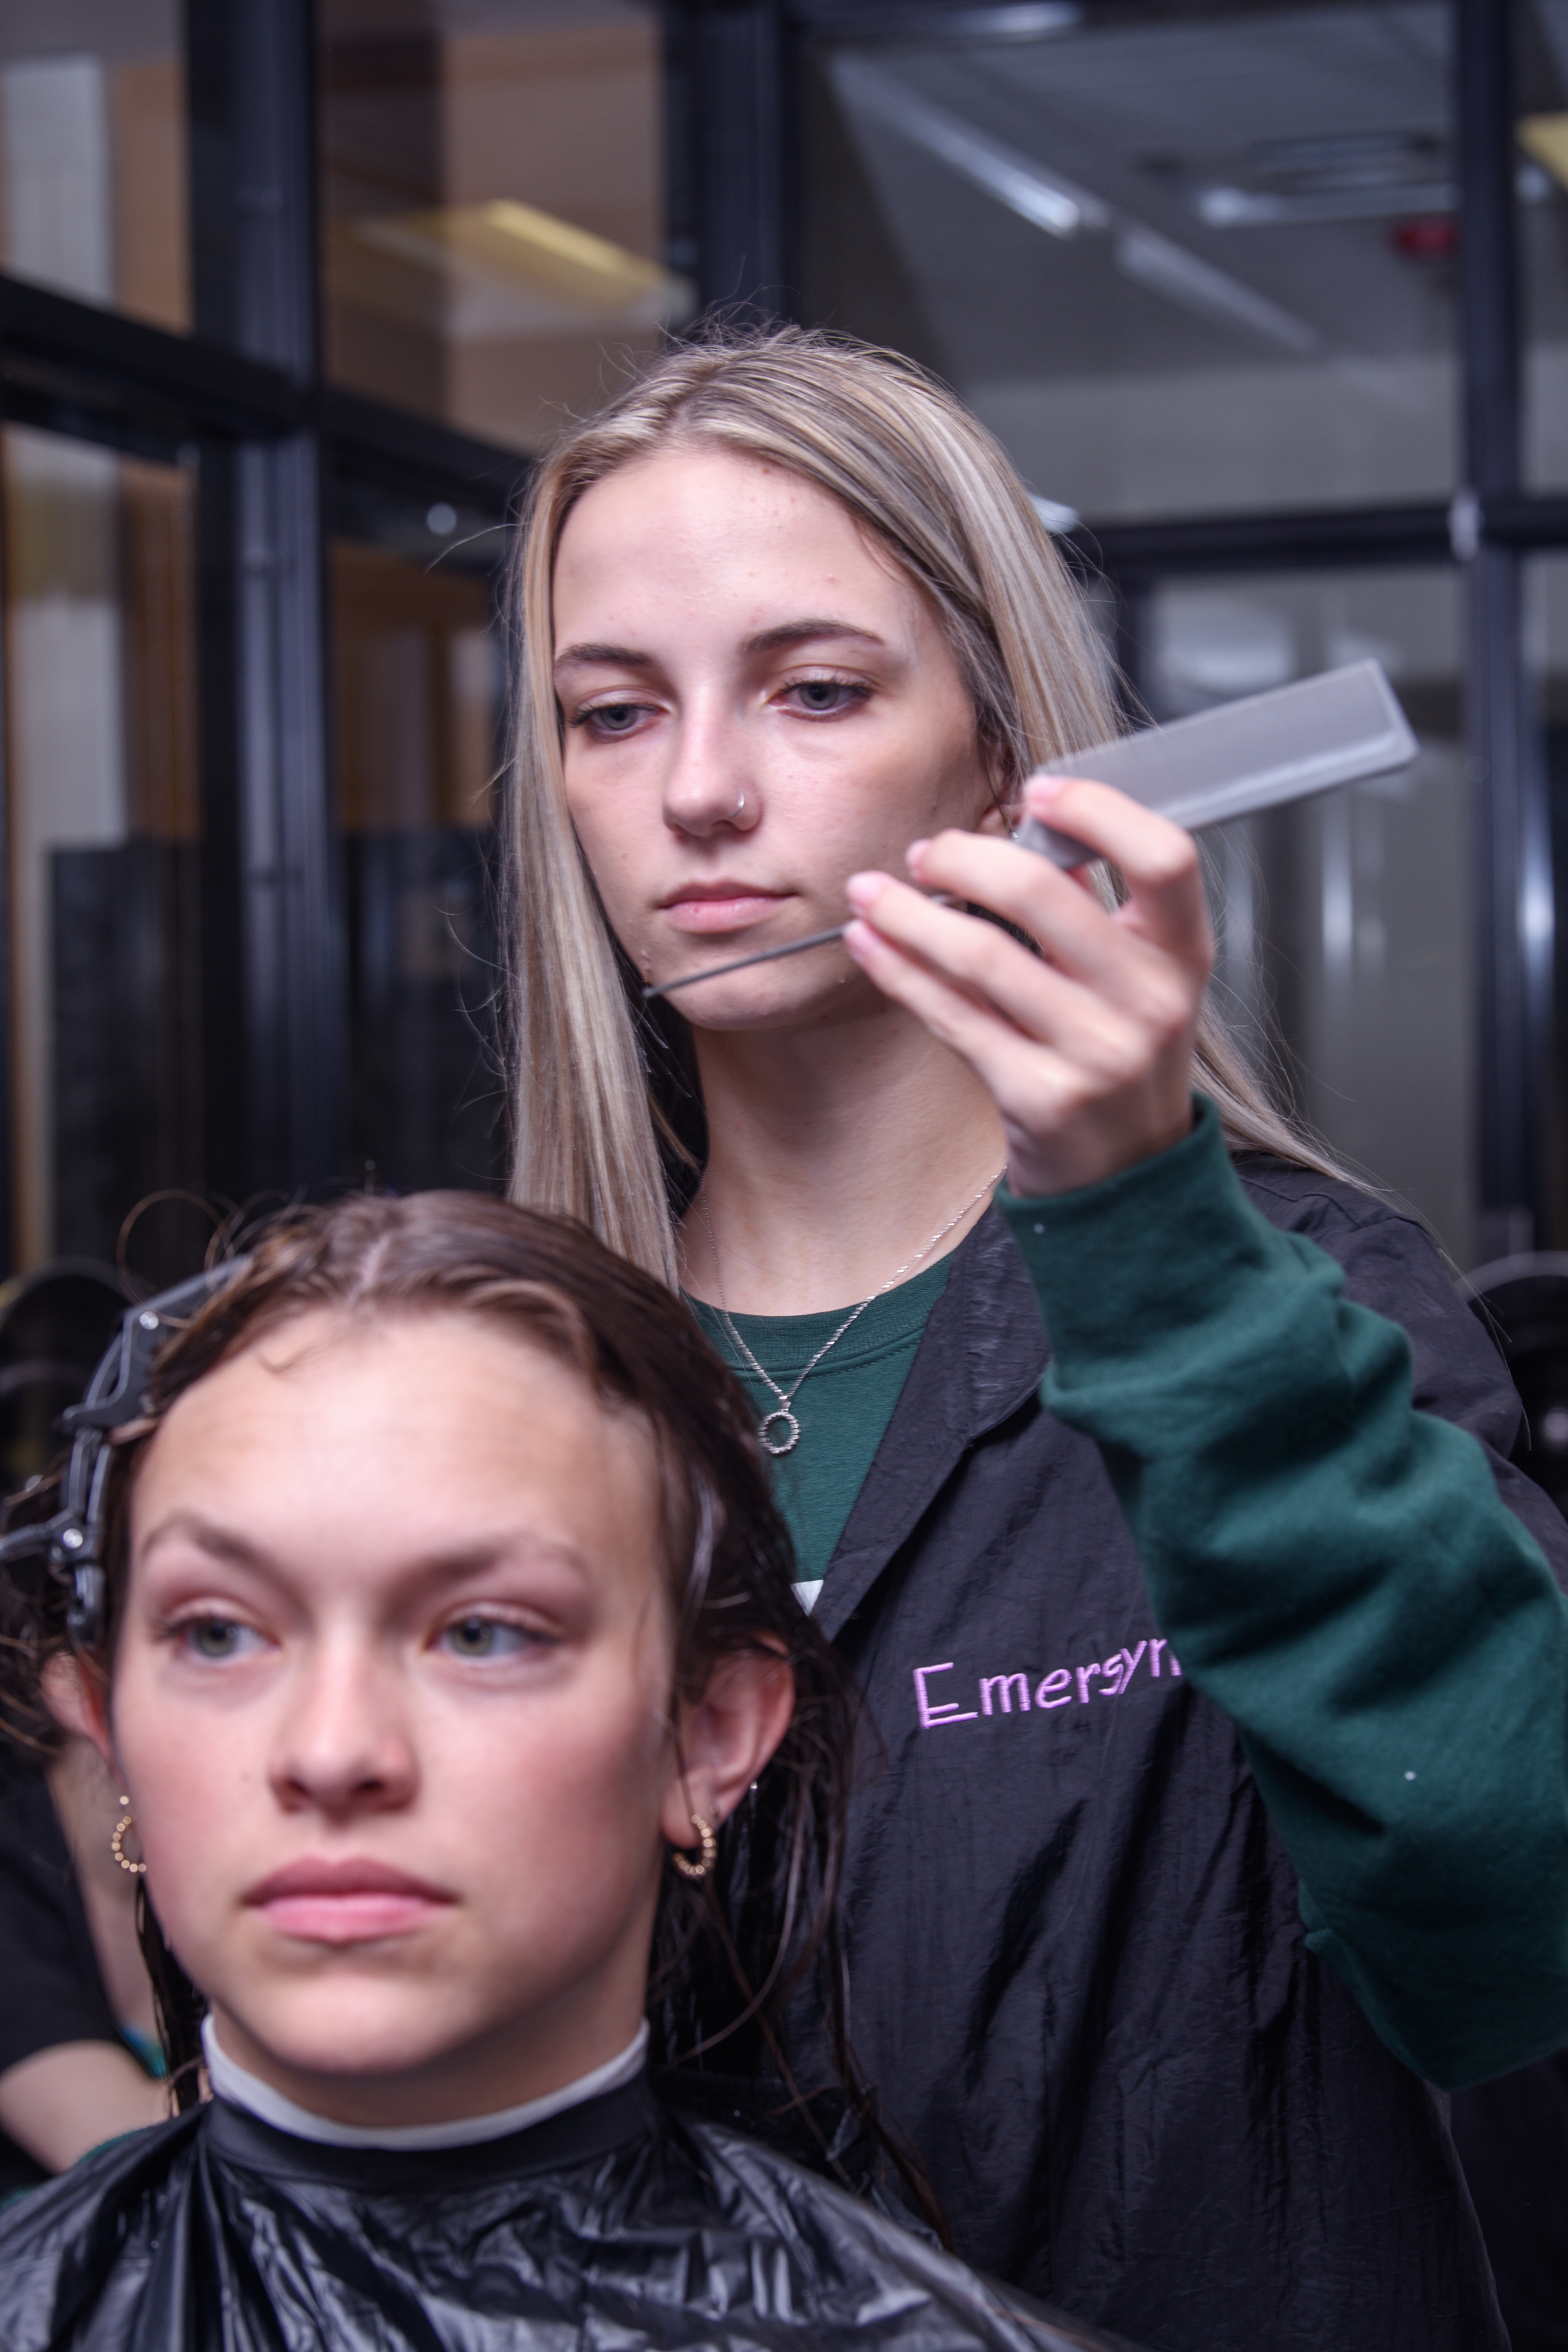 Female Cosmetology student works on sectioning off the hair of another female student.